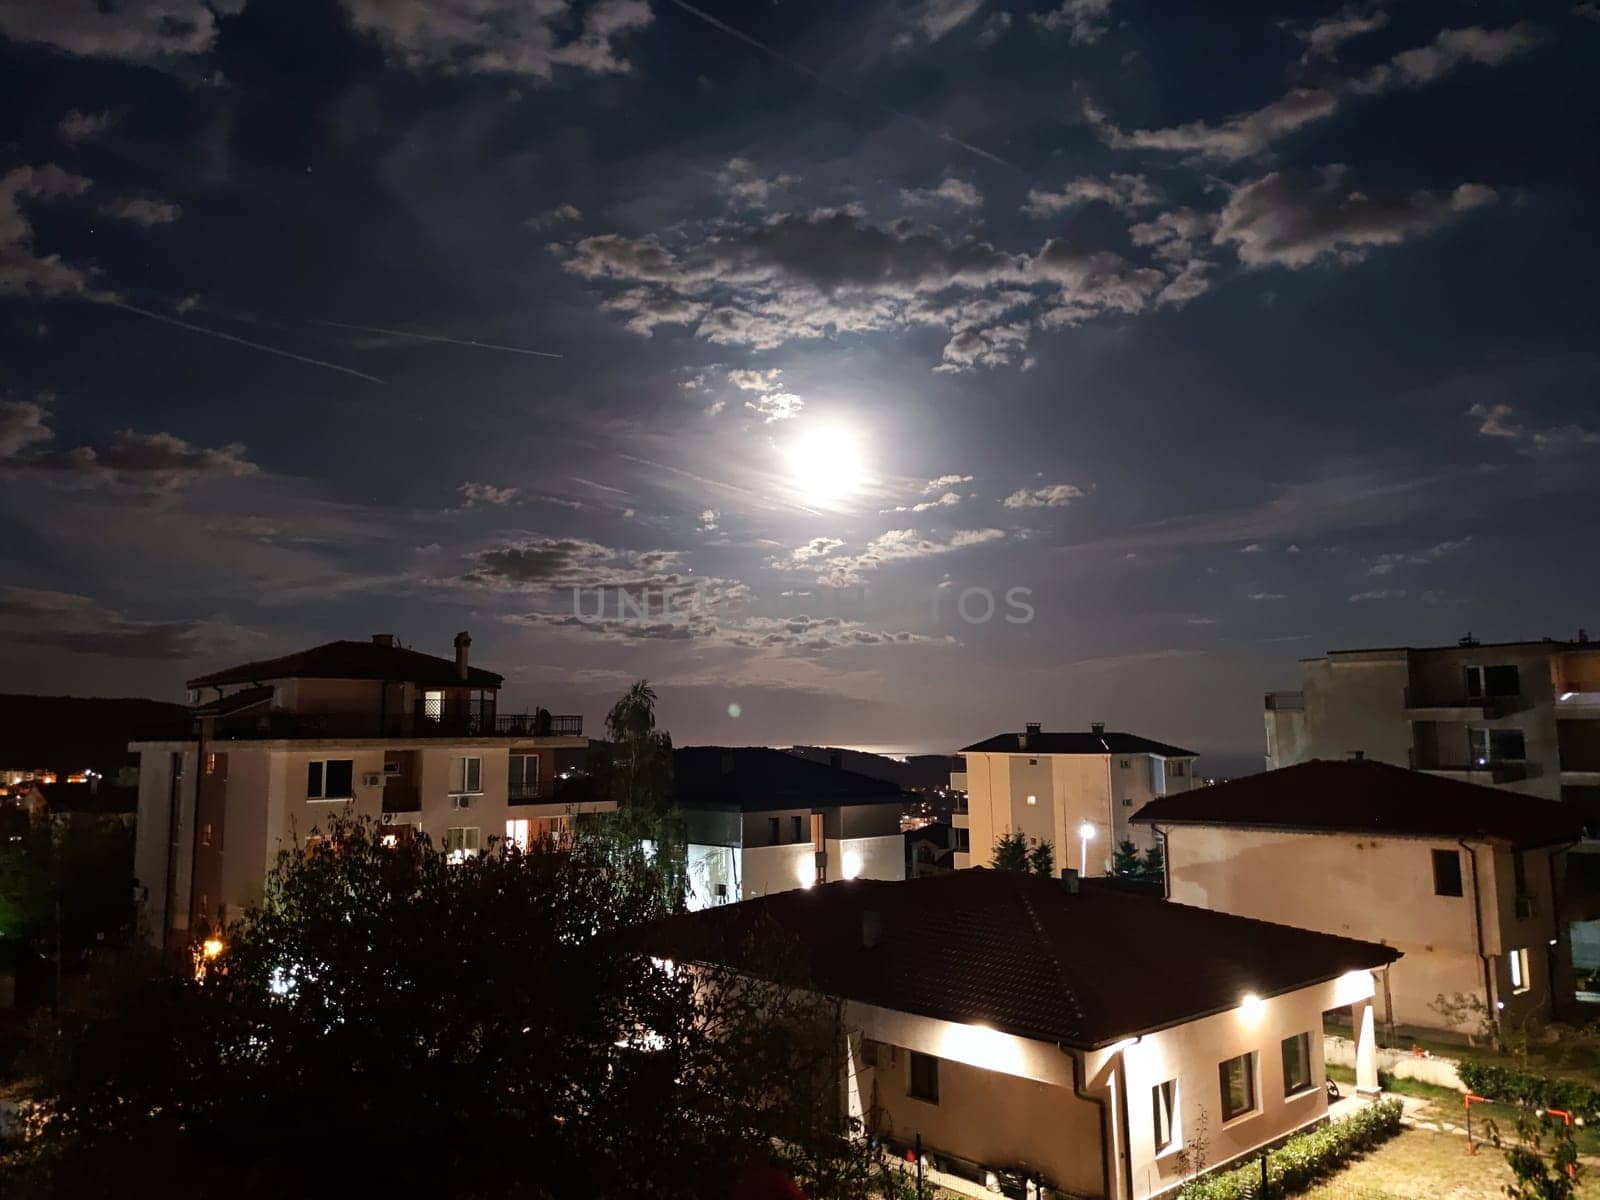 moon in the cloudy night sky above the houses by Annado